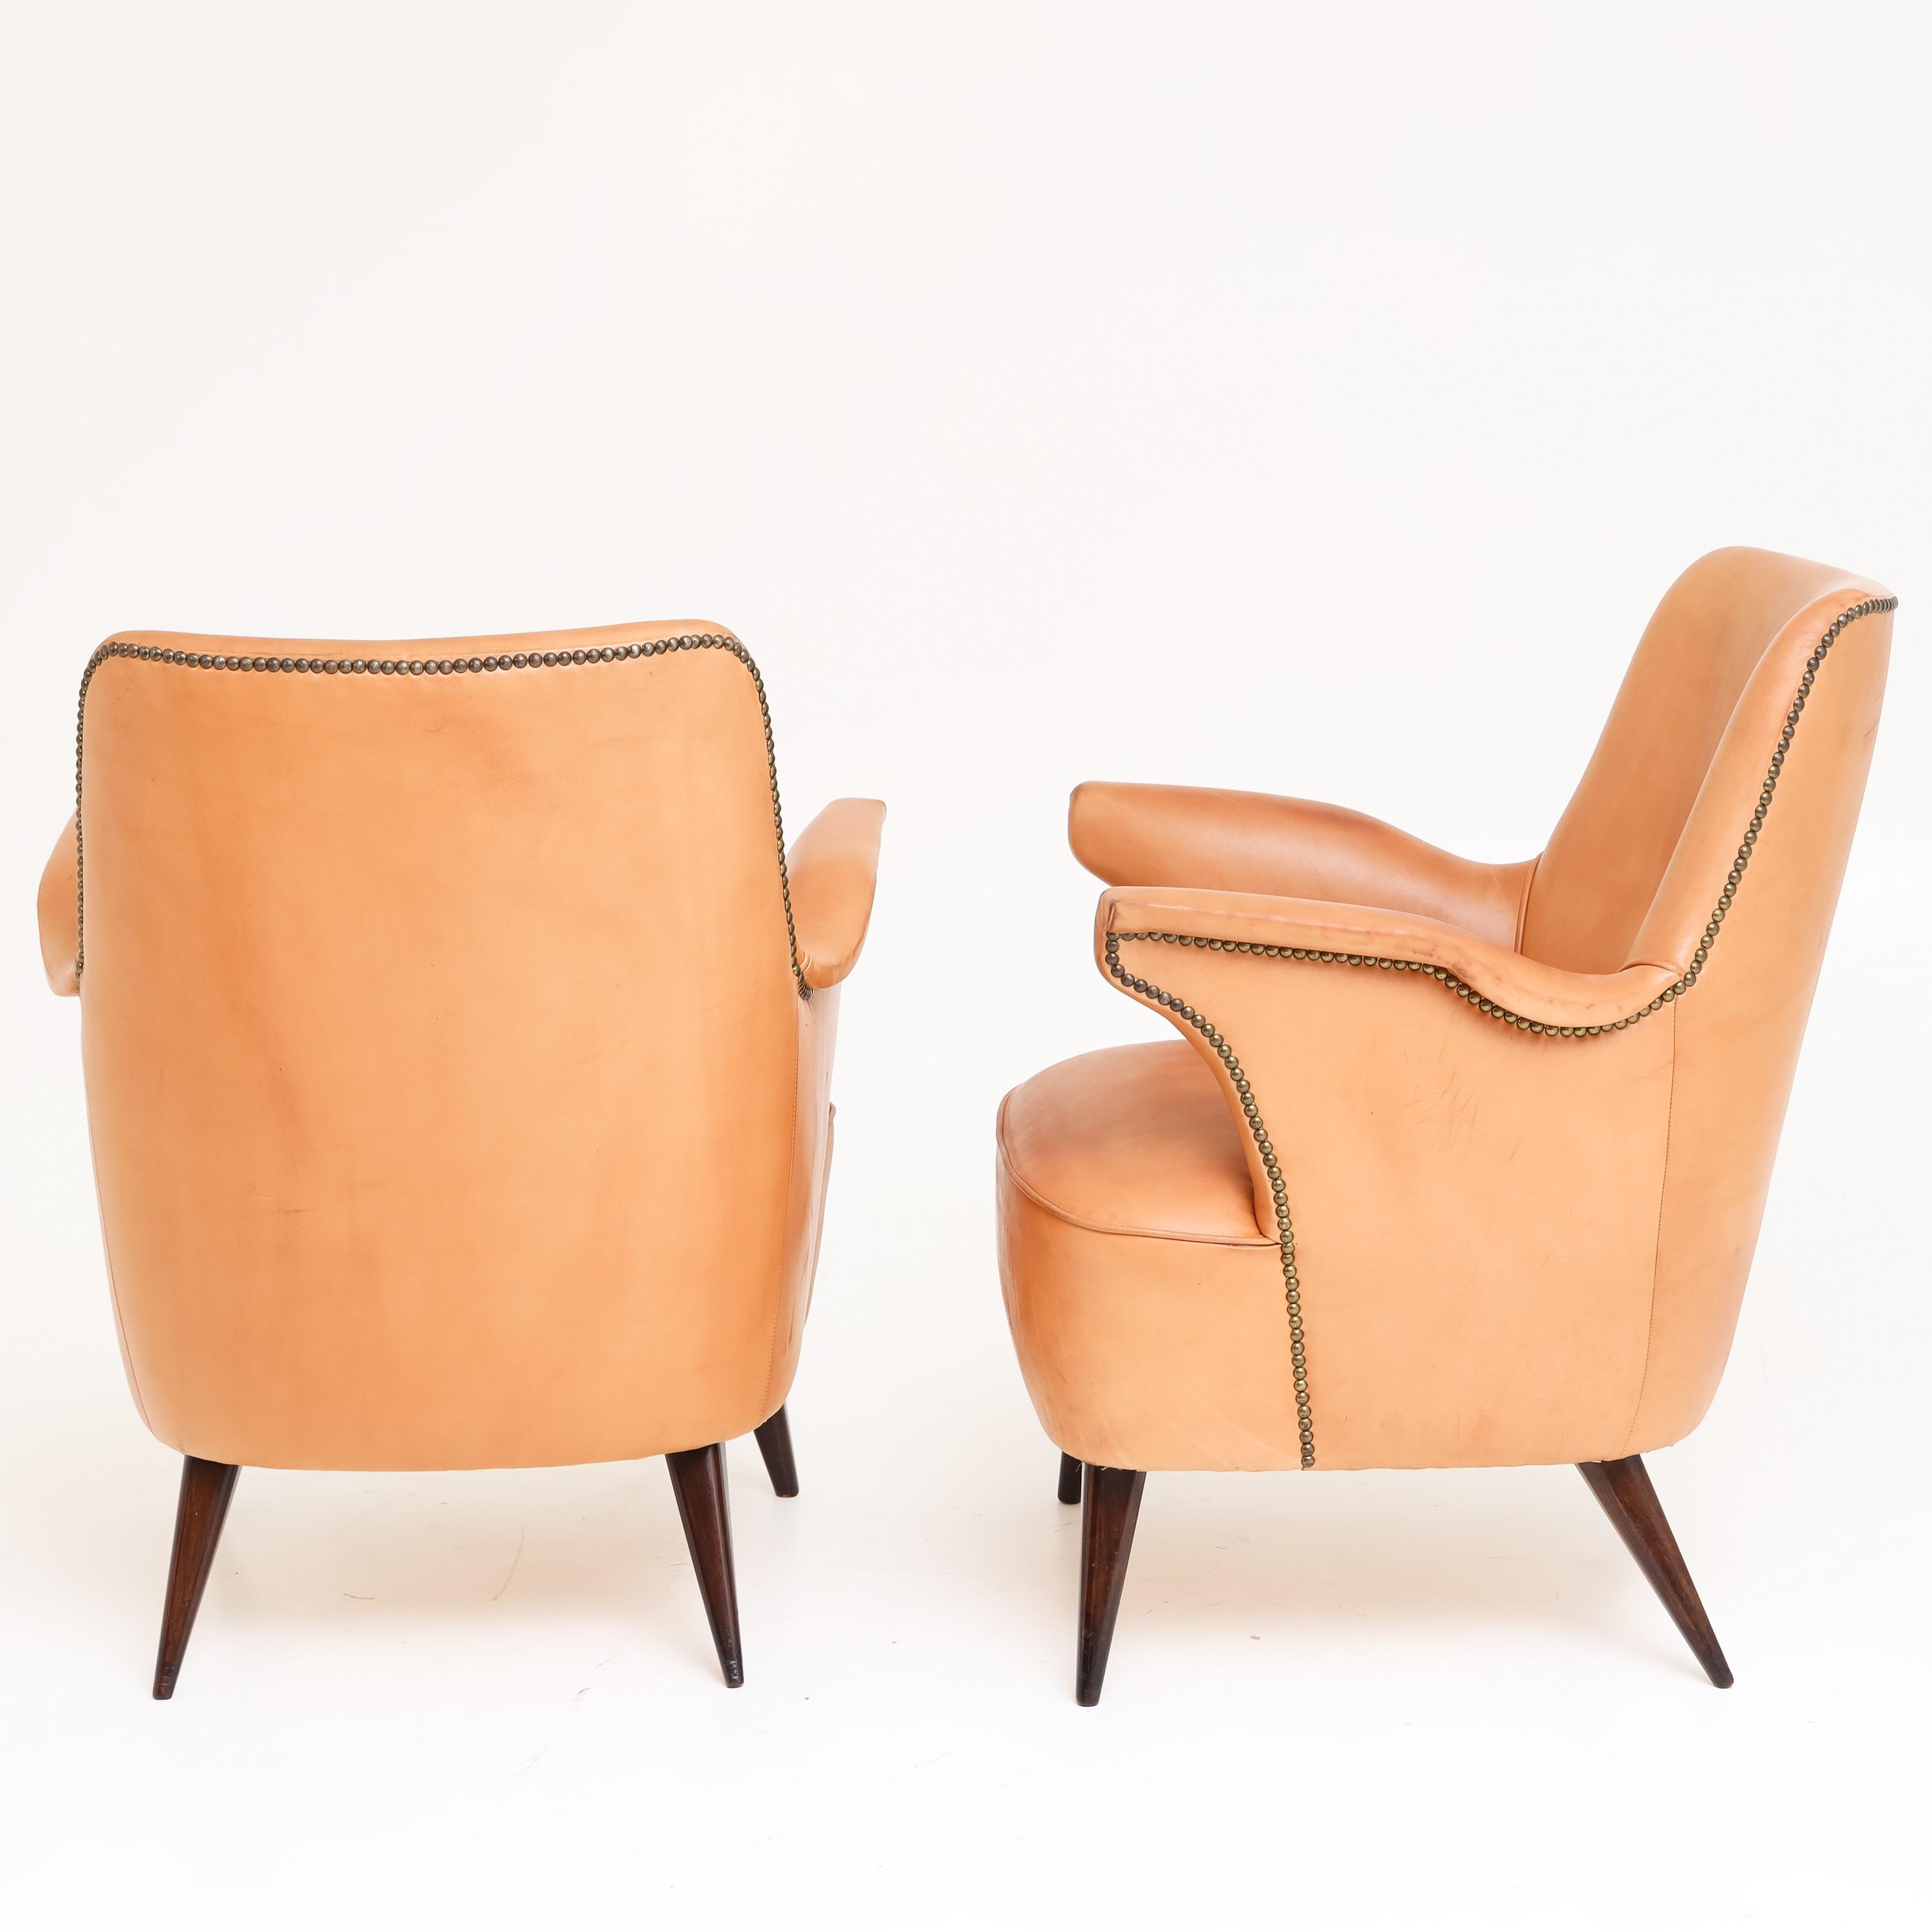 Leather Lounge Chairs, Attributed to Giovanni 'Nino' Zoncada, Italy, 1950s